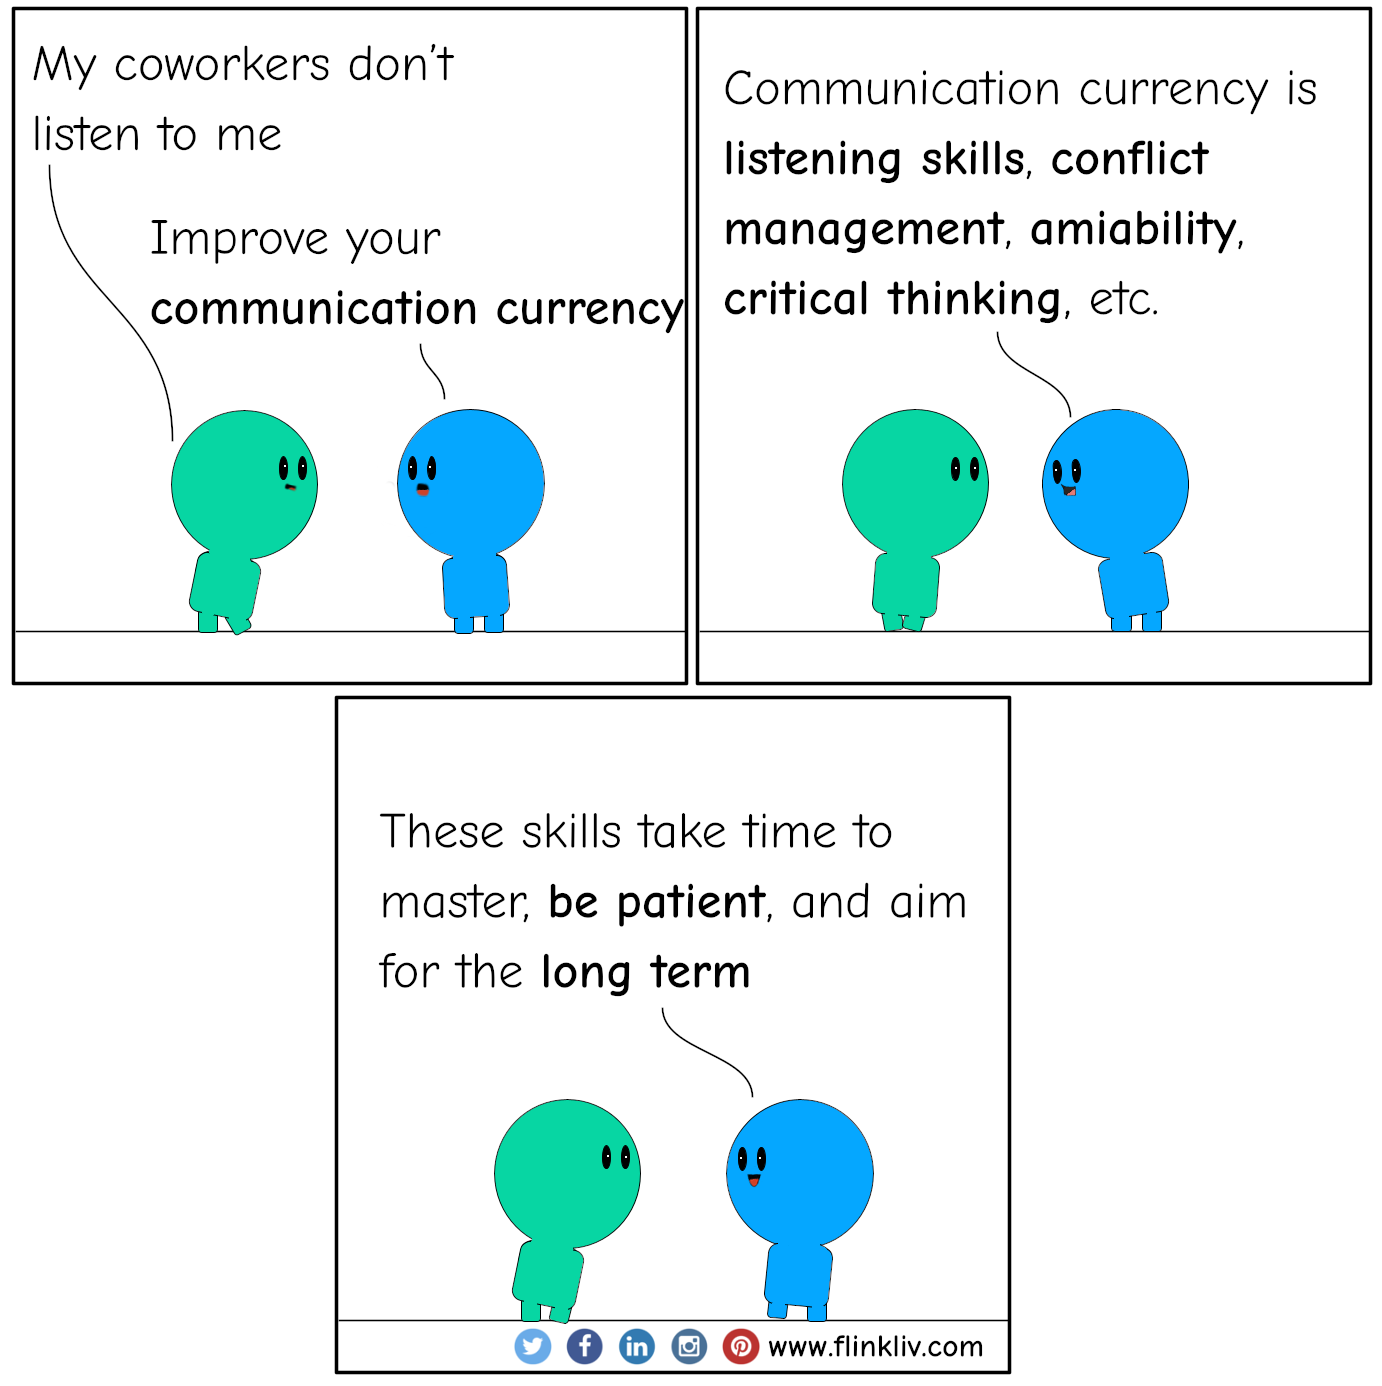 Conversation between A and B about communication currency A: My coworkers don’t listen to me. B: Improve your communication currency. B: It is listening, conflict management, amiability, critical thinking, etc. B: These skills take time to master, be patient, and aim for the long term. By flinkliv.com